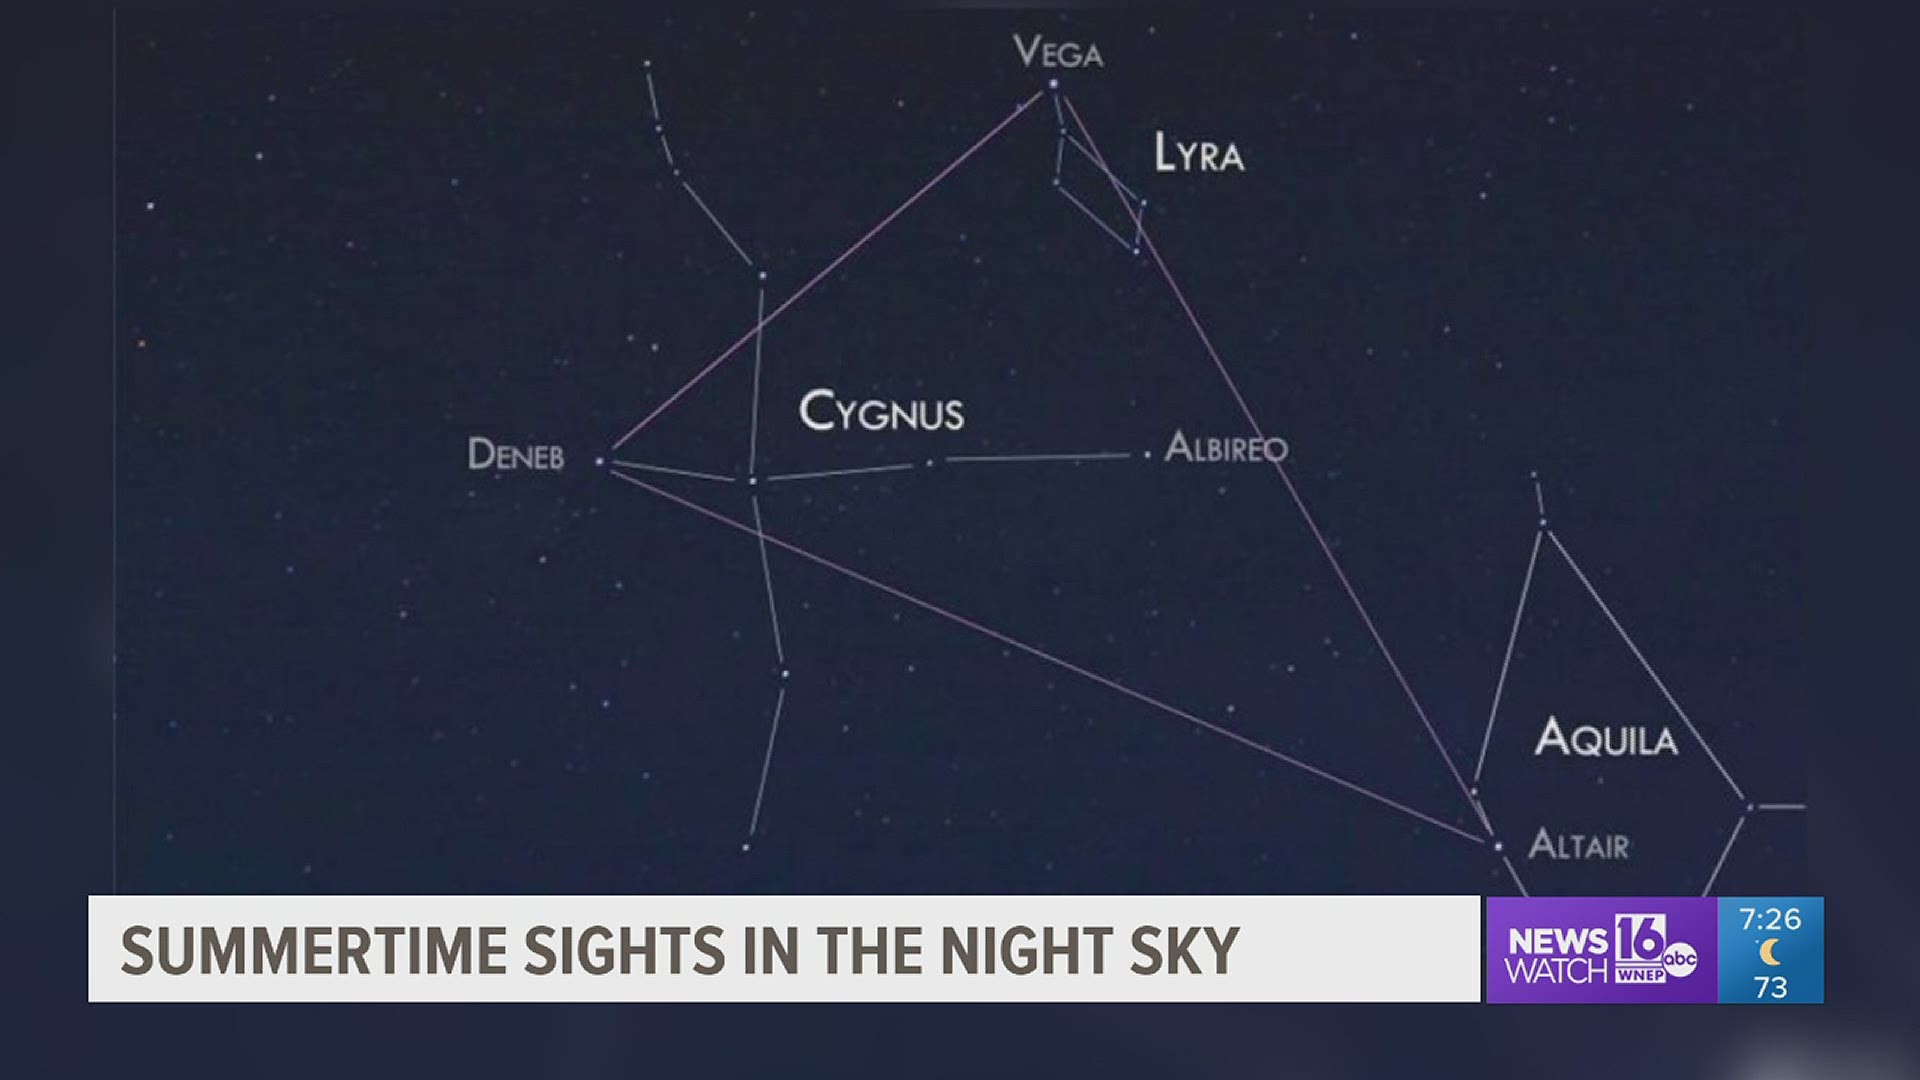 The warmer temperatures on the way make for a comfortable to spend a night under the stars. John Hickey shows us what we can see in this week's Skywatch 16.